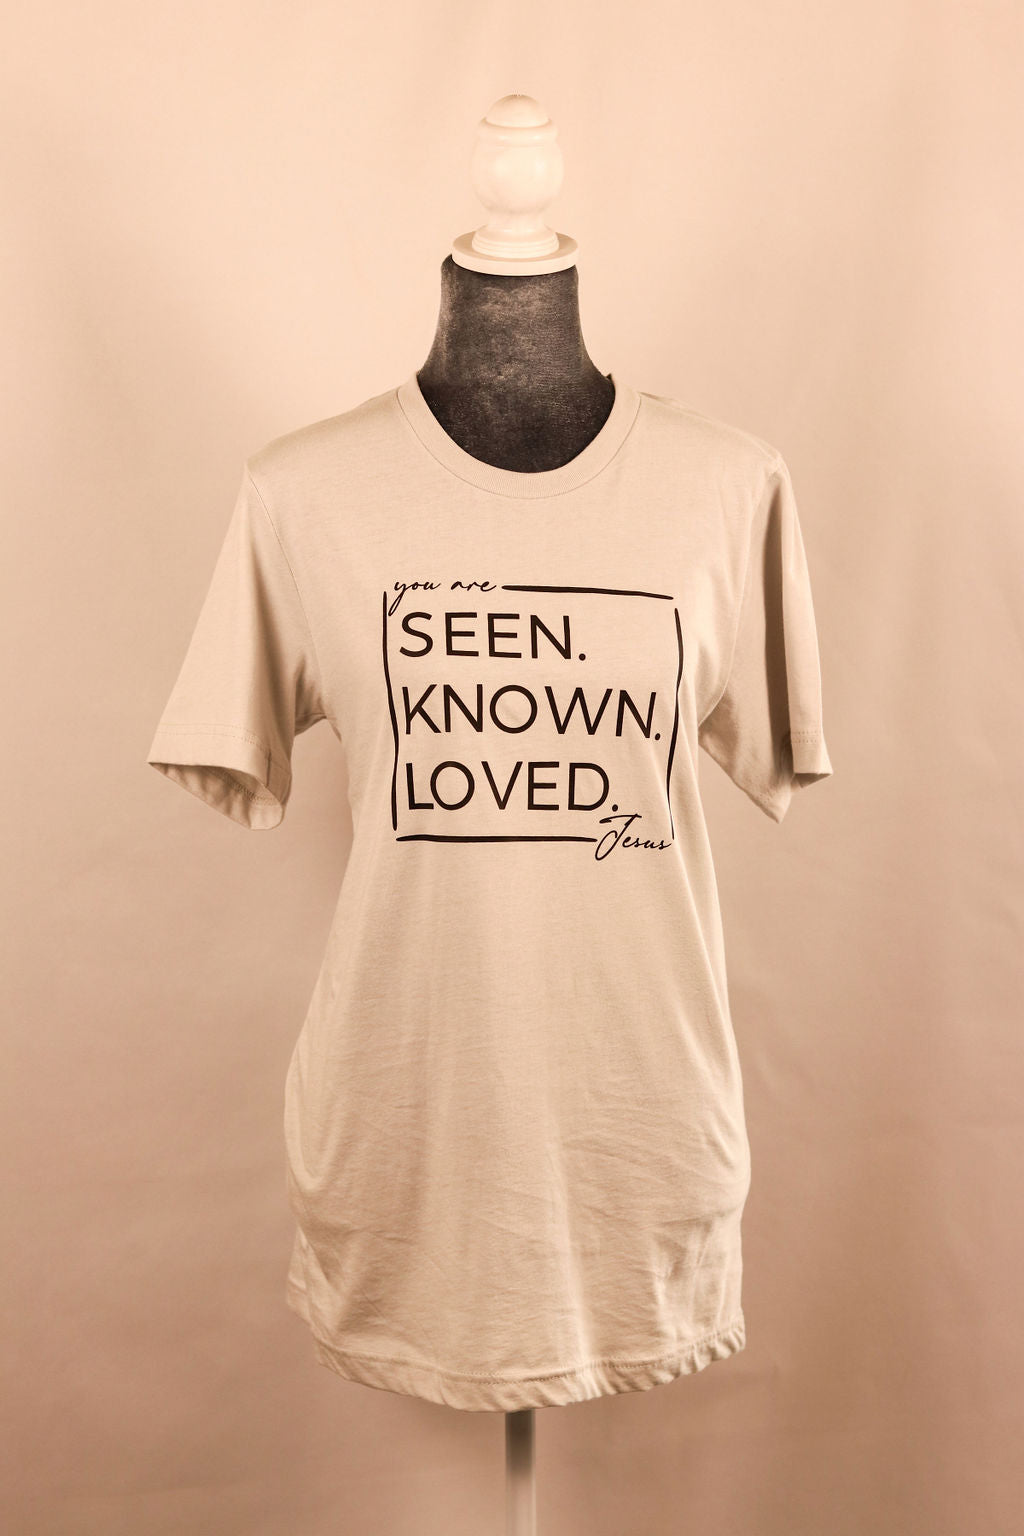 Seen.Known.Loved. Short Sleeve silver/grey tee